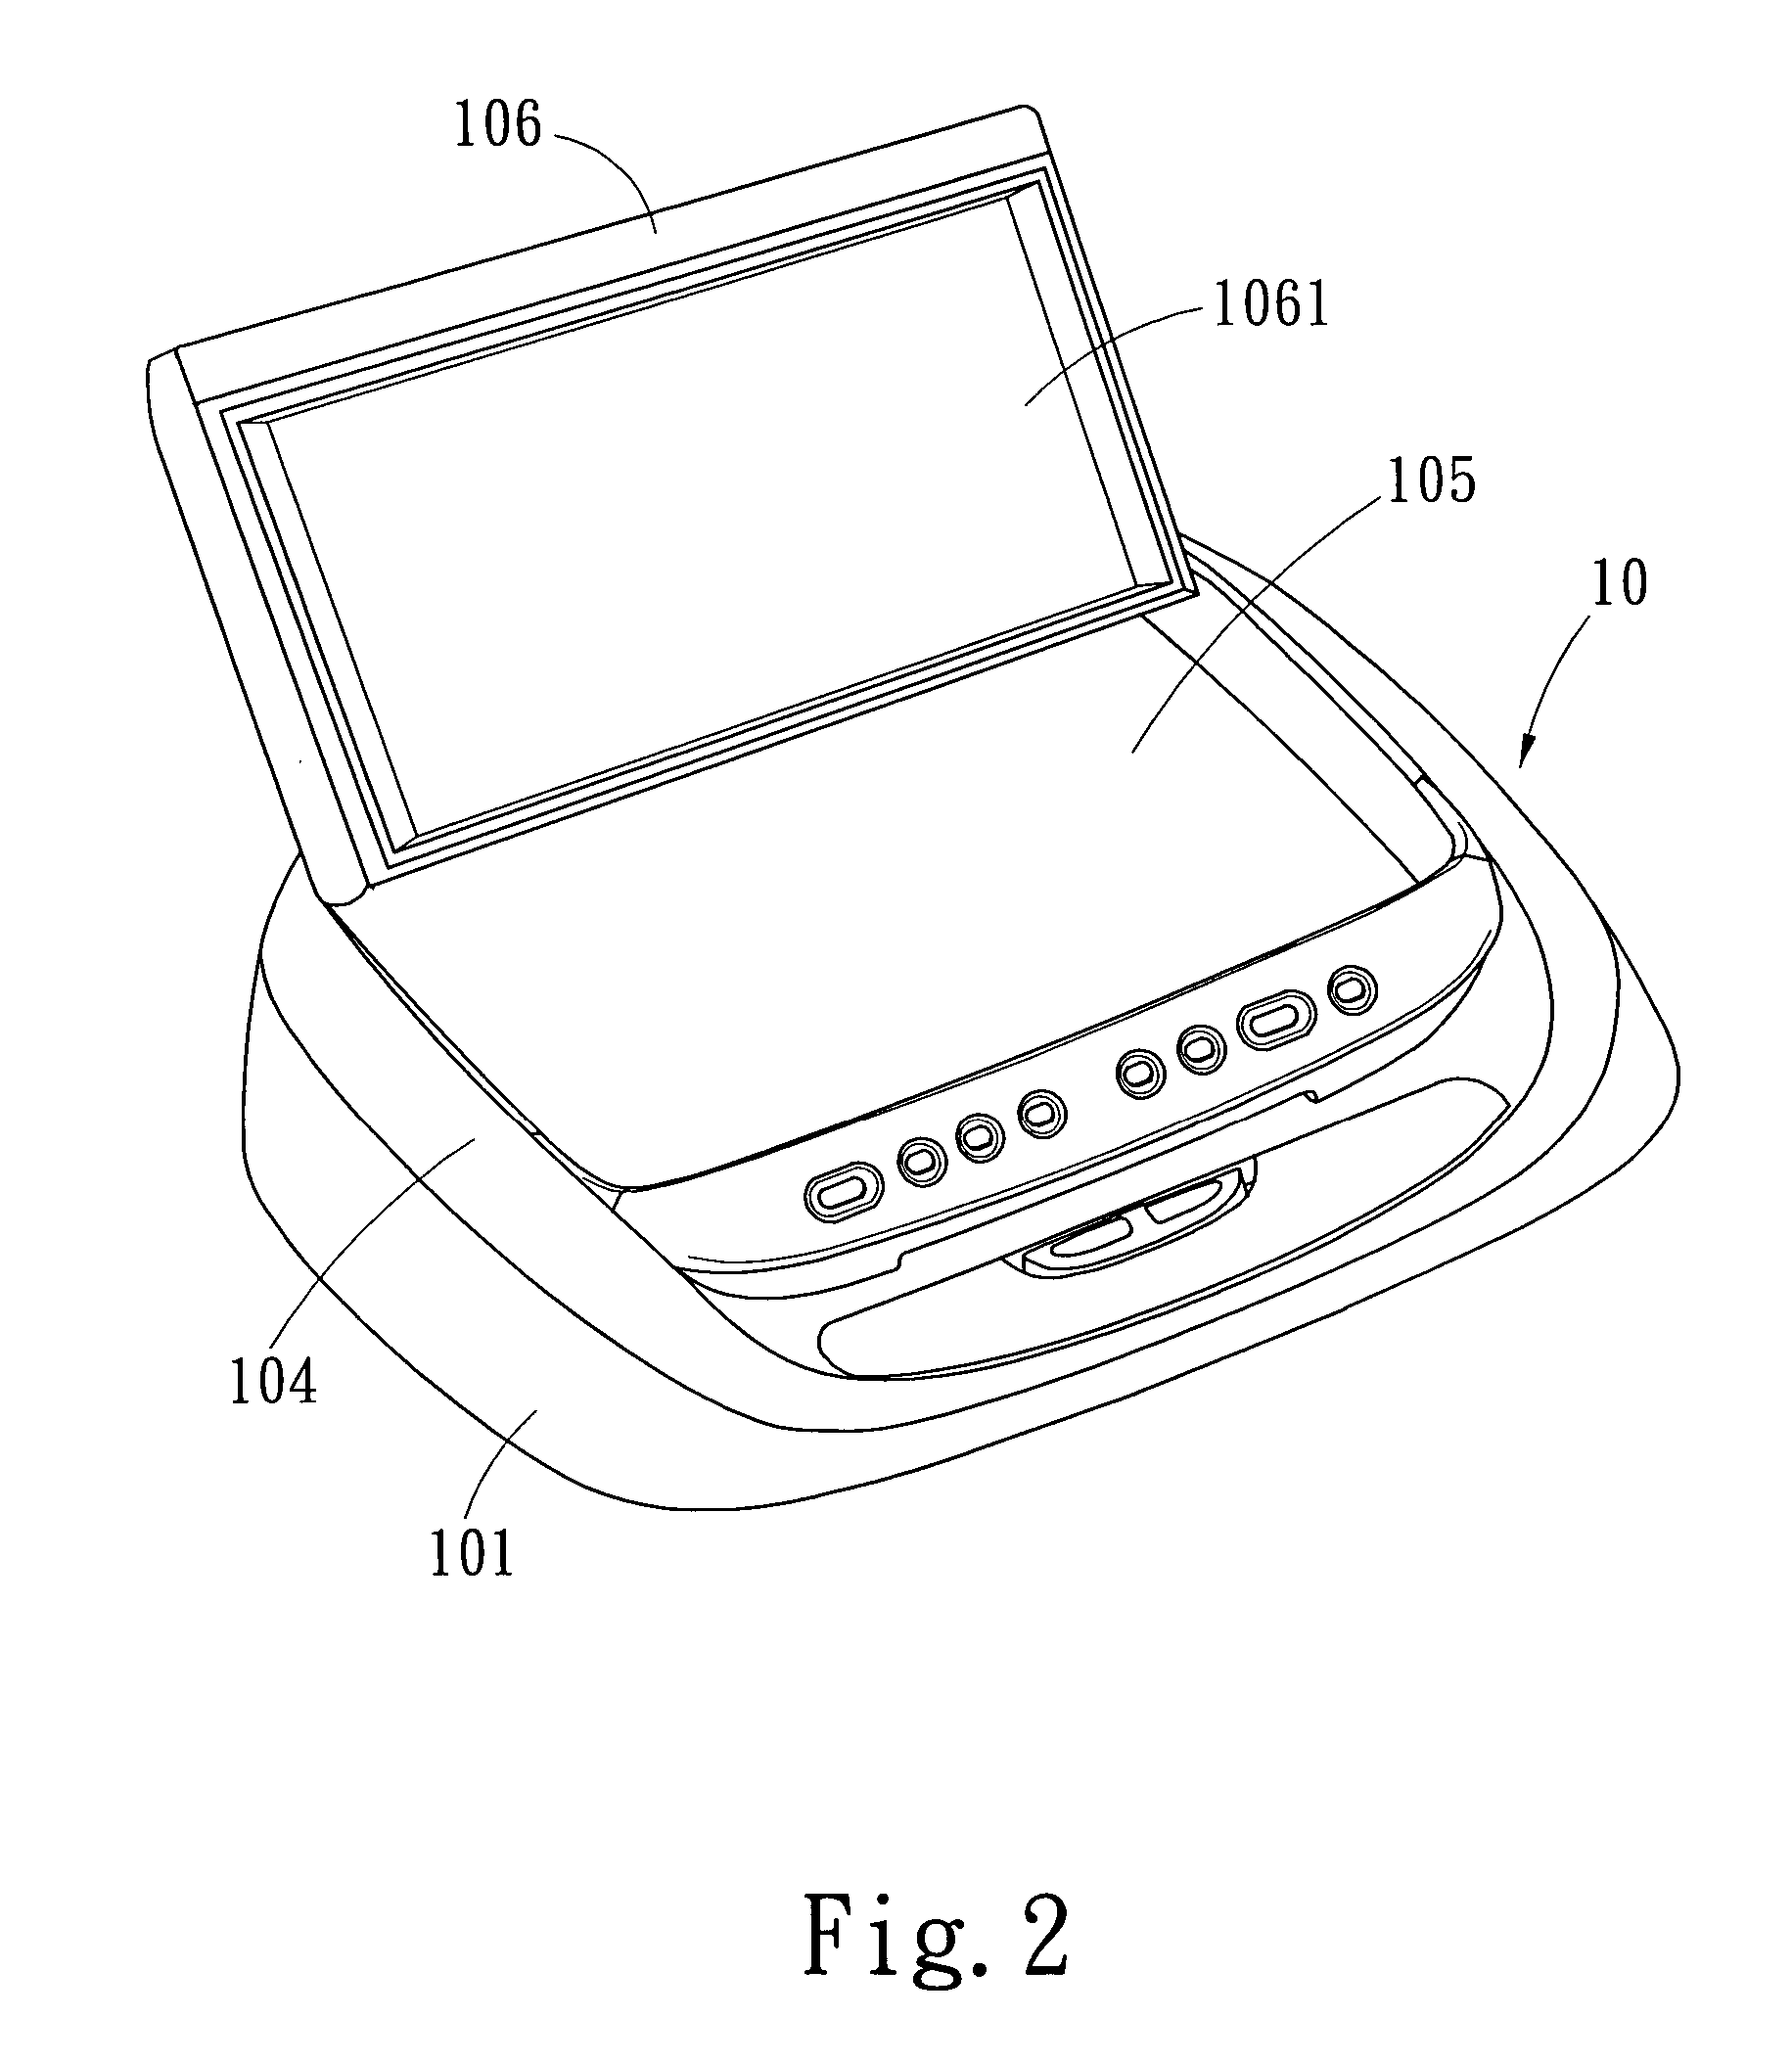 Combined audio-visual device for cars